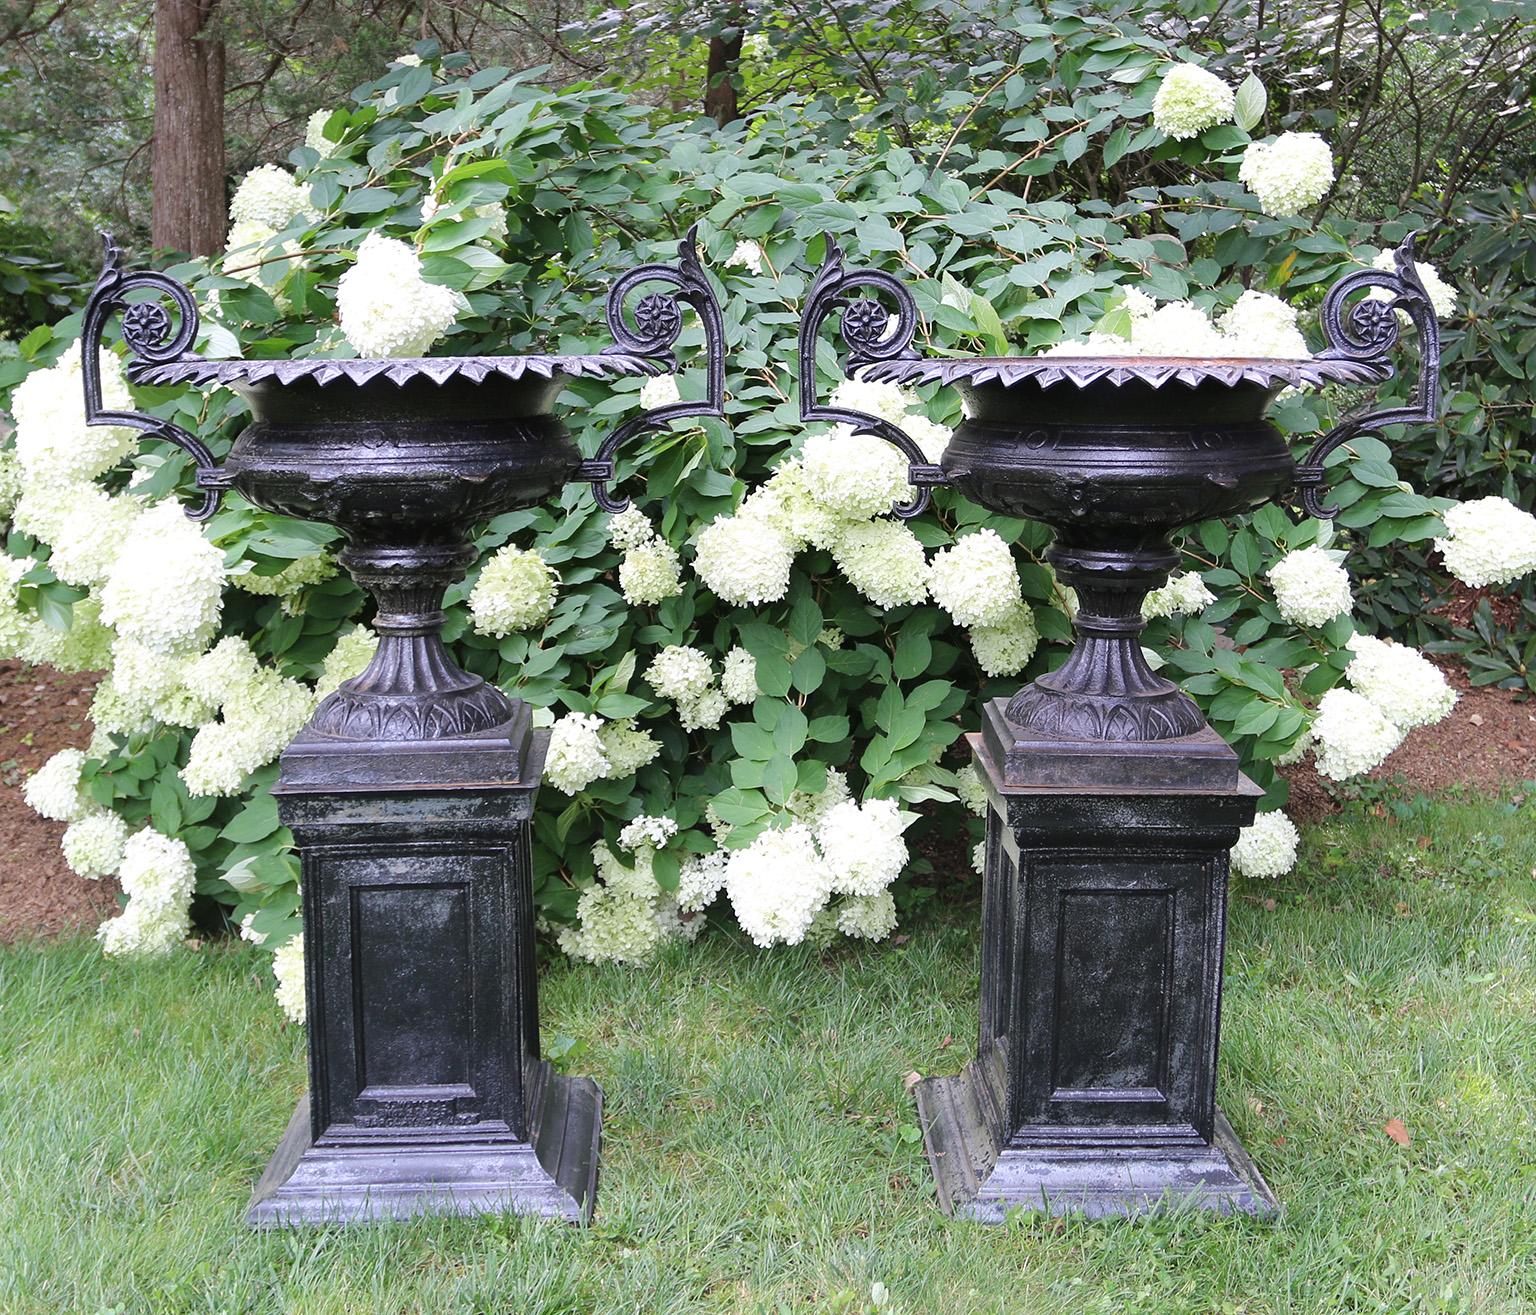 A pair of cast-iron “Poplar” urns on pedestals by J.W. Fiske Iron Works, the urns with arabesque handles with rosette flourishes and pointed scalloped rims, the bodies of the urns with acanthus leaf motif, and the fluted socles with modified egg and